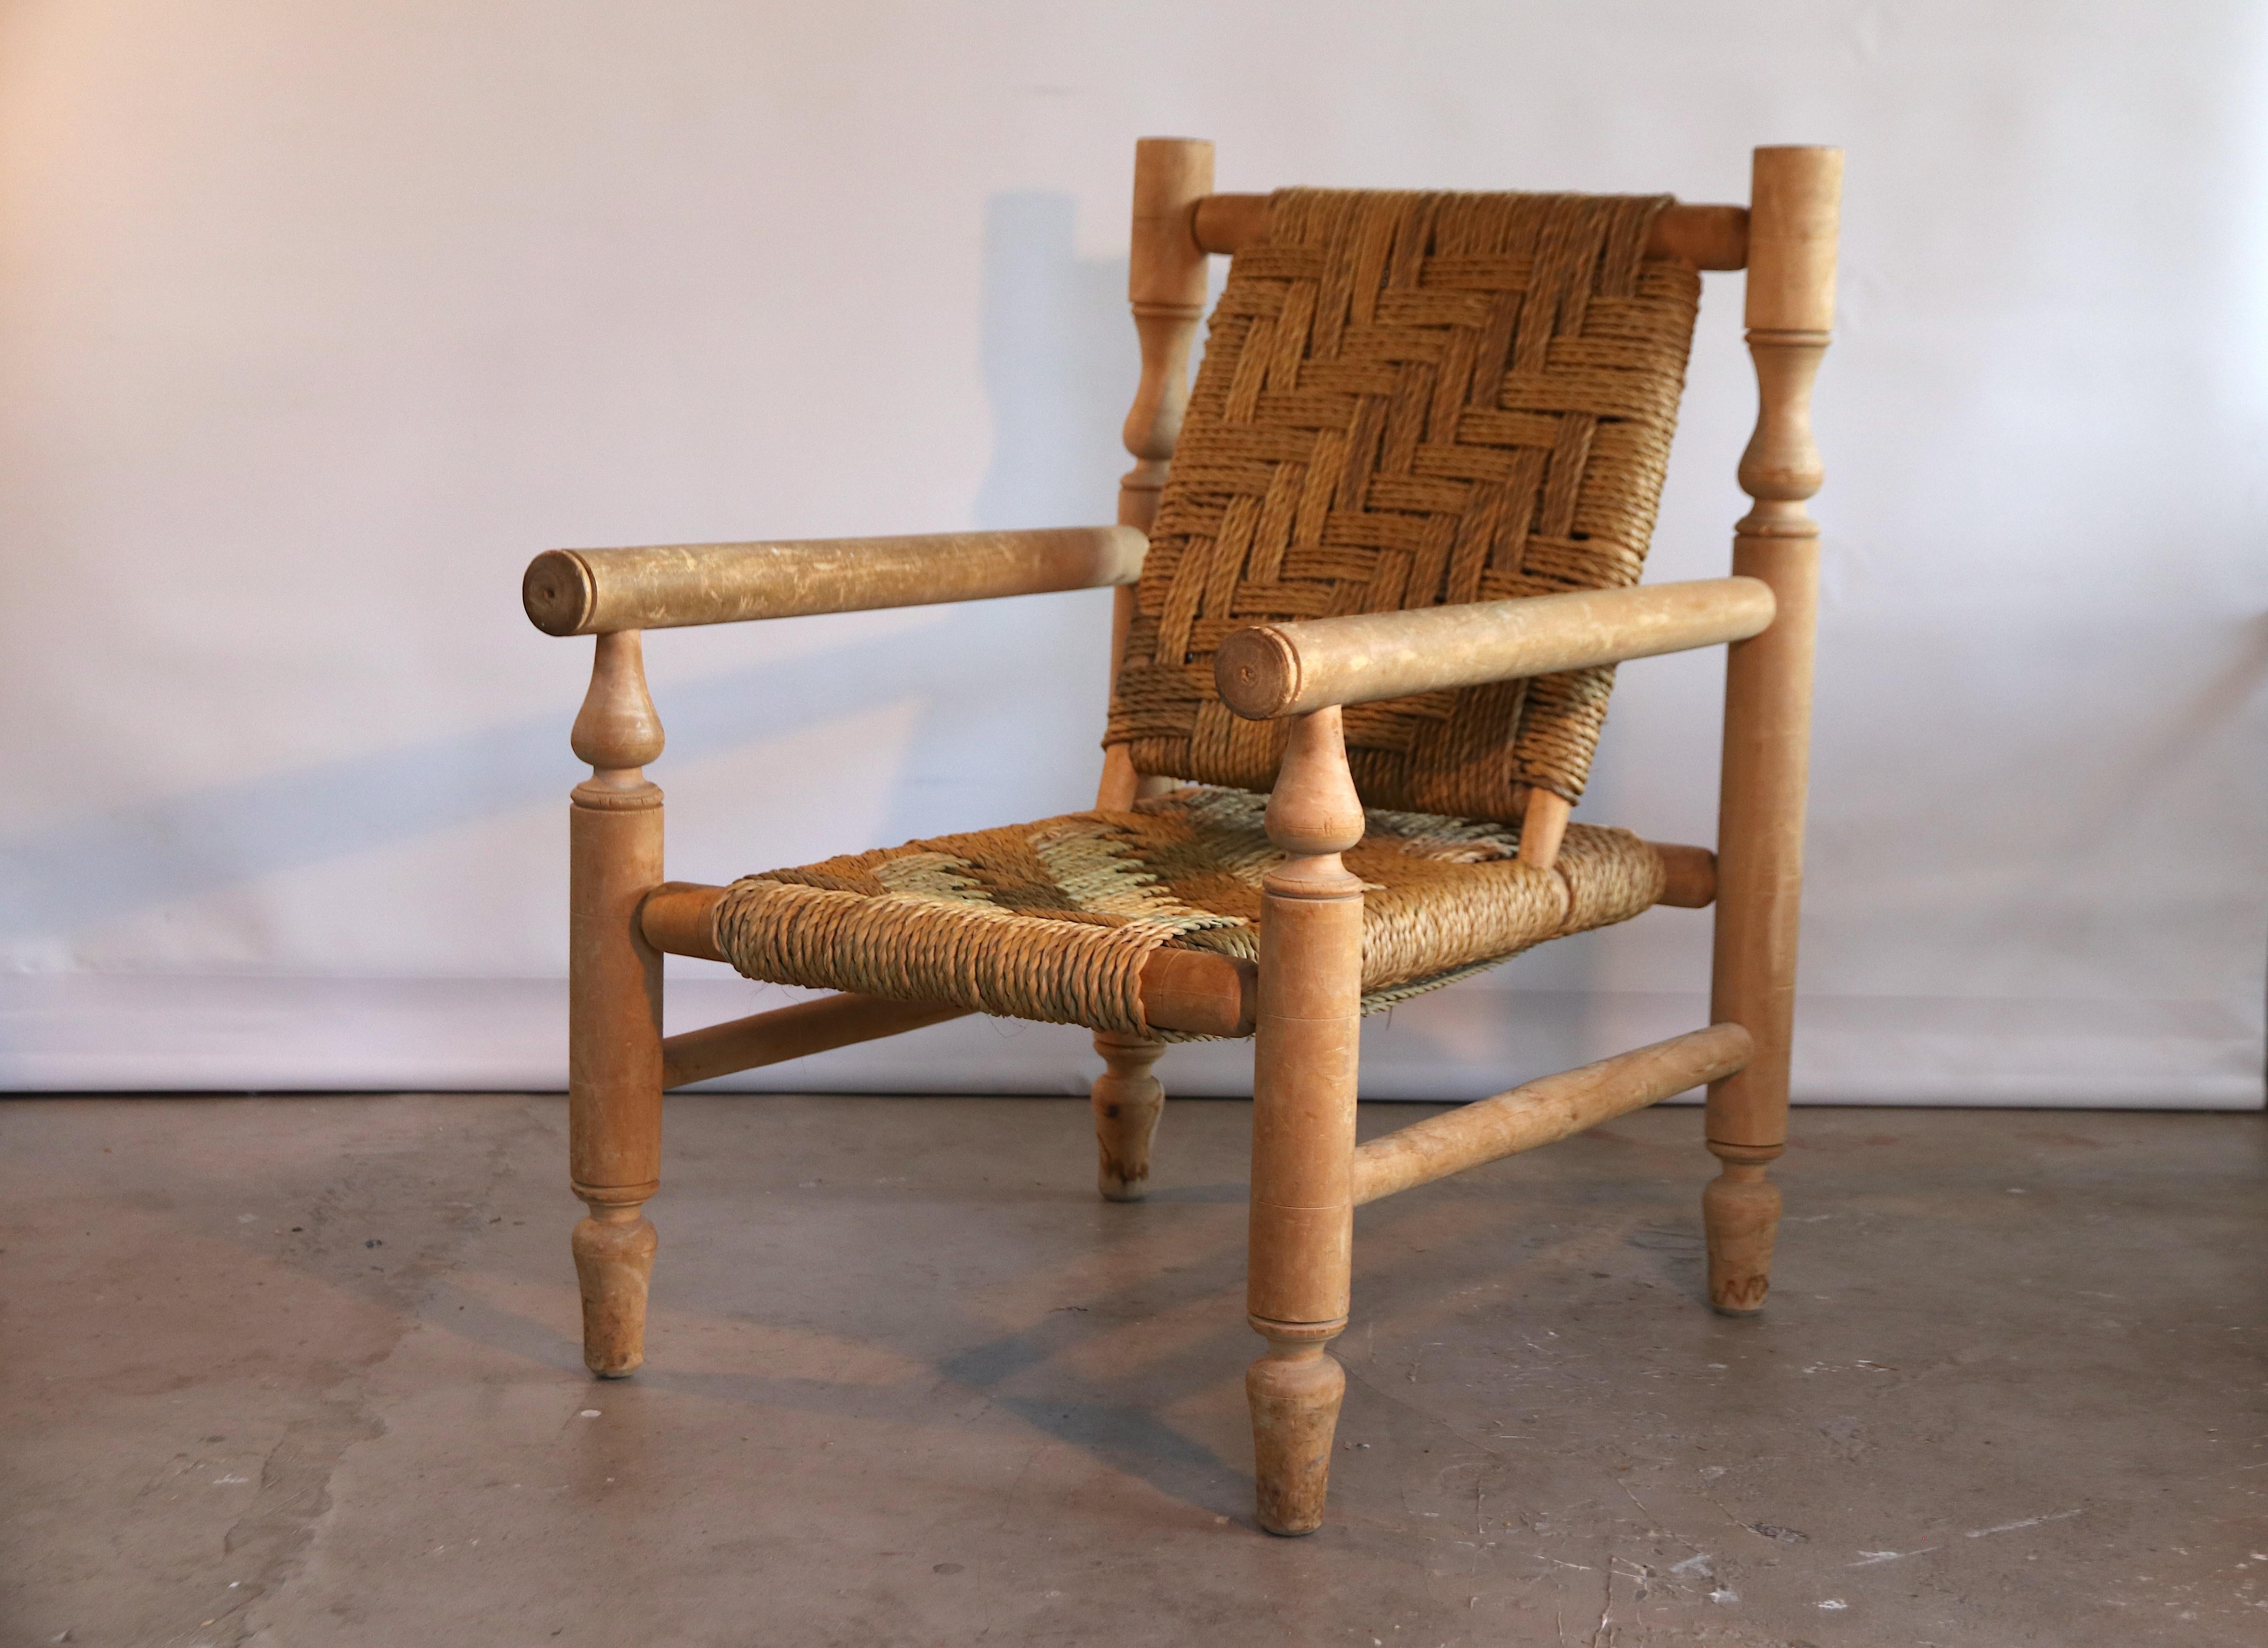 French easy chair that is beautifully handcrafted without any use of nails or iron. The seat and back are made of a wonderfully hand braised sisal rope. The chair has a nice natural Ibiza style and feel to it. The frame is made of the distinguishing